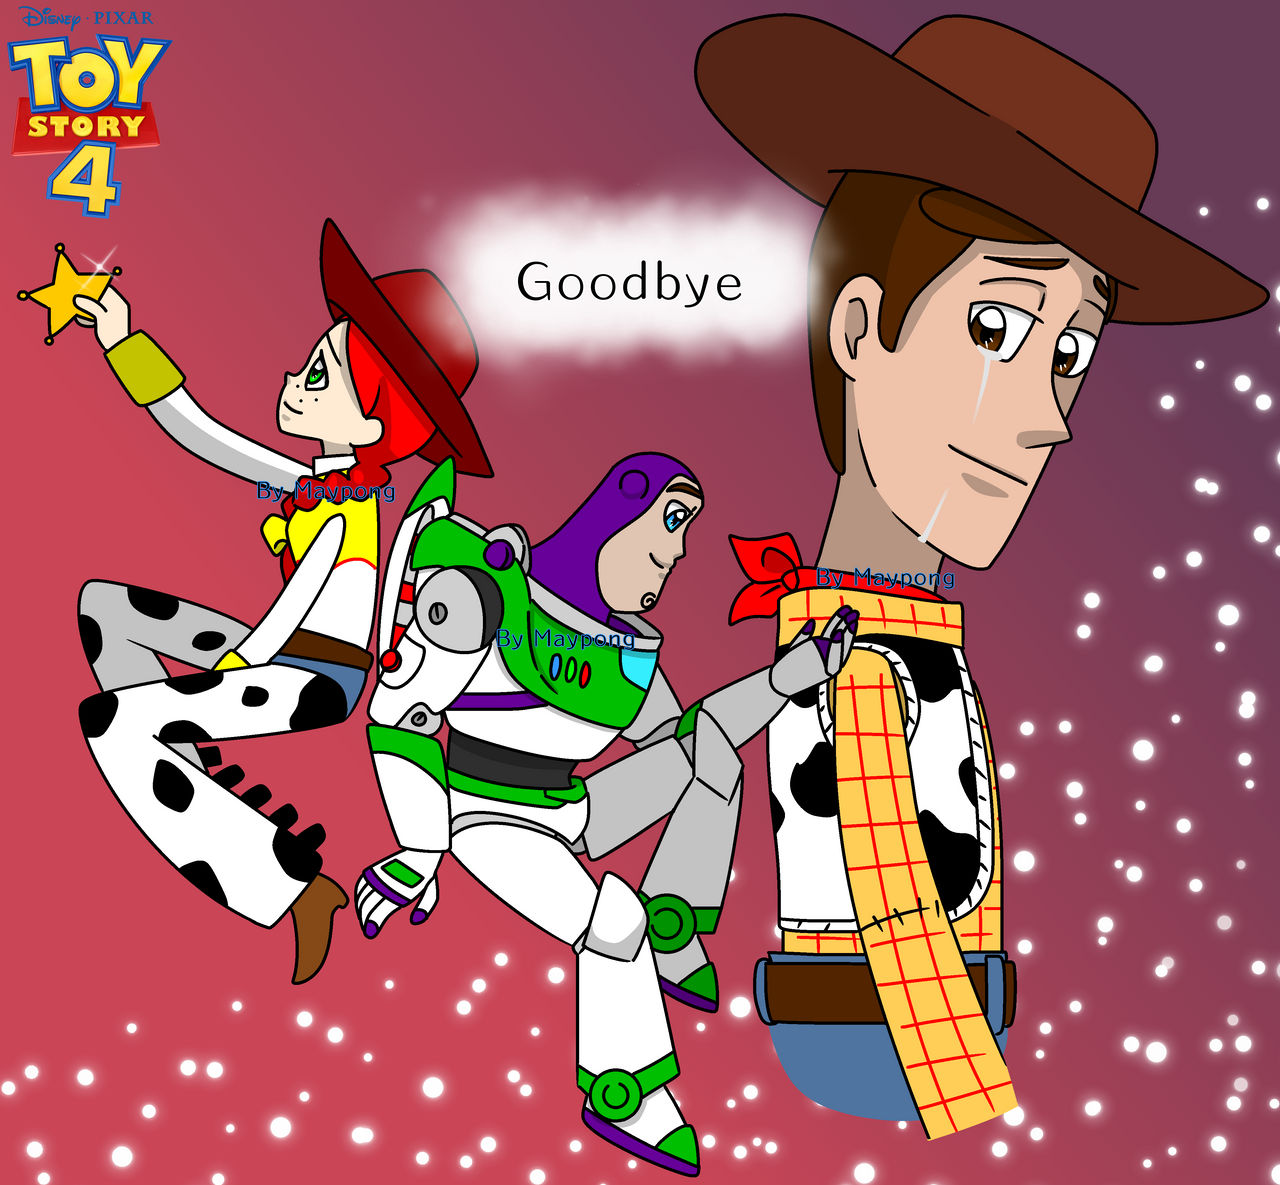 Toy Story Bonnie plays with Jessie and Bullseye, Can you fe…